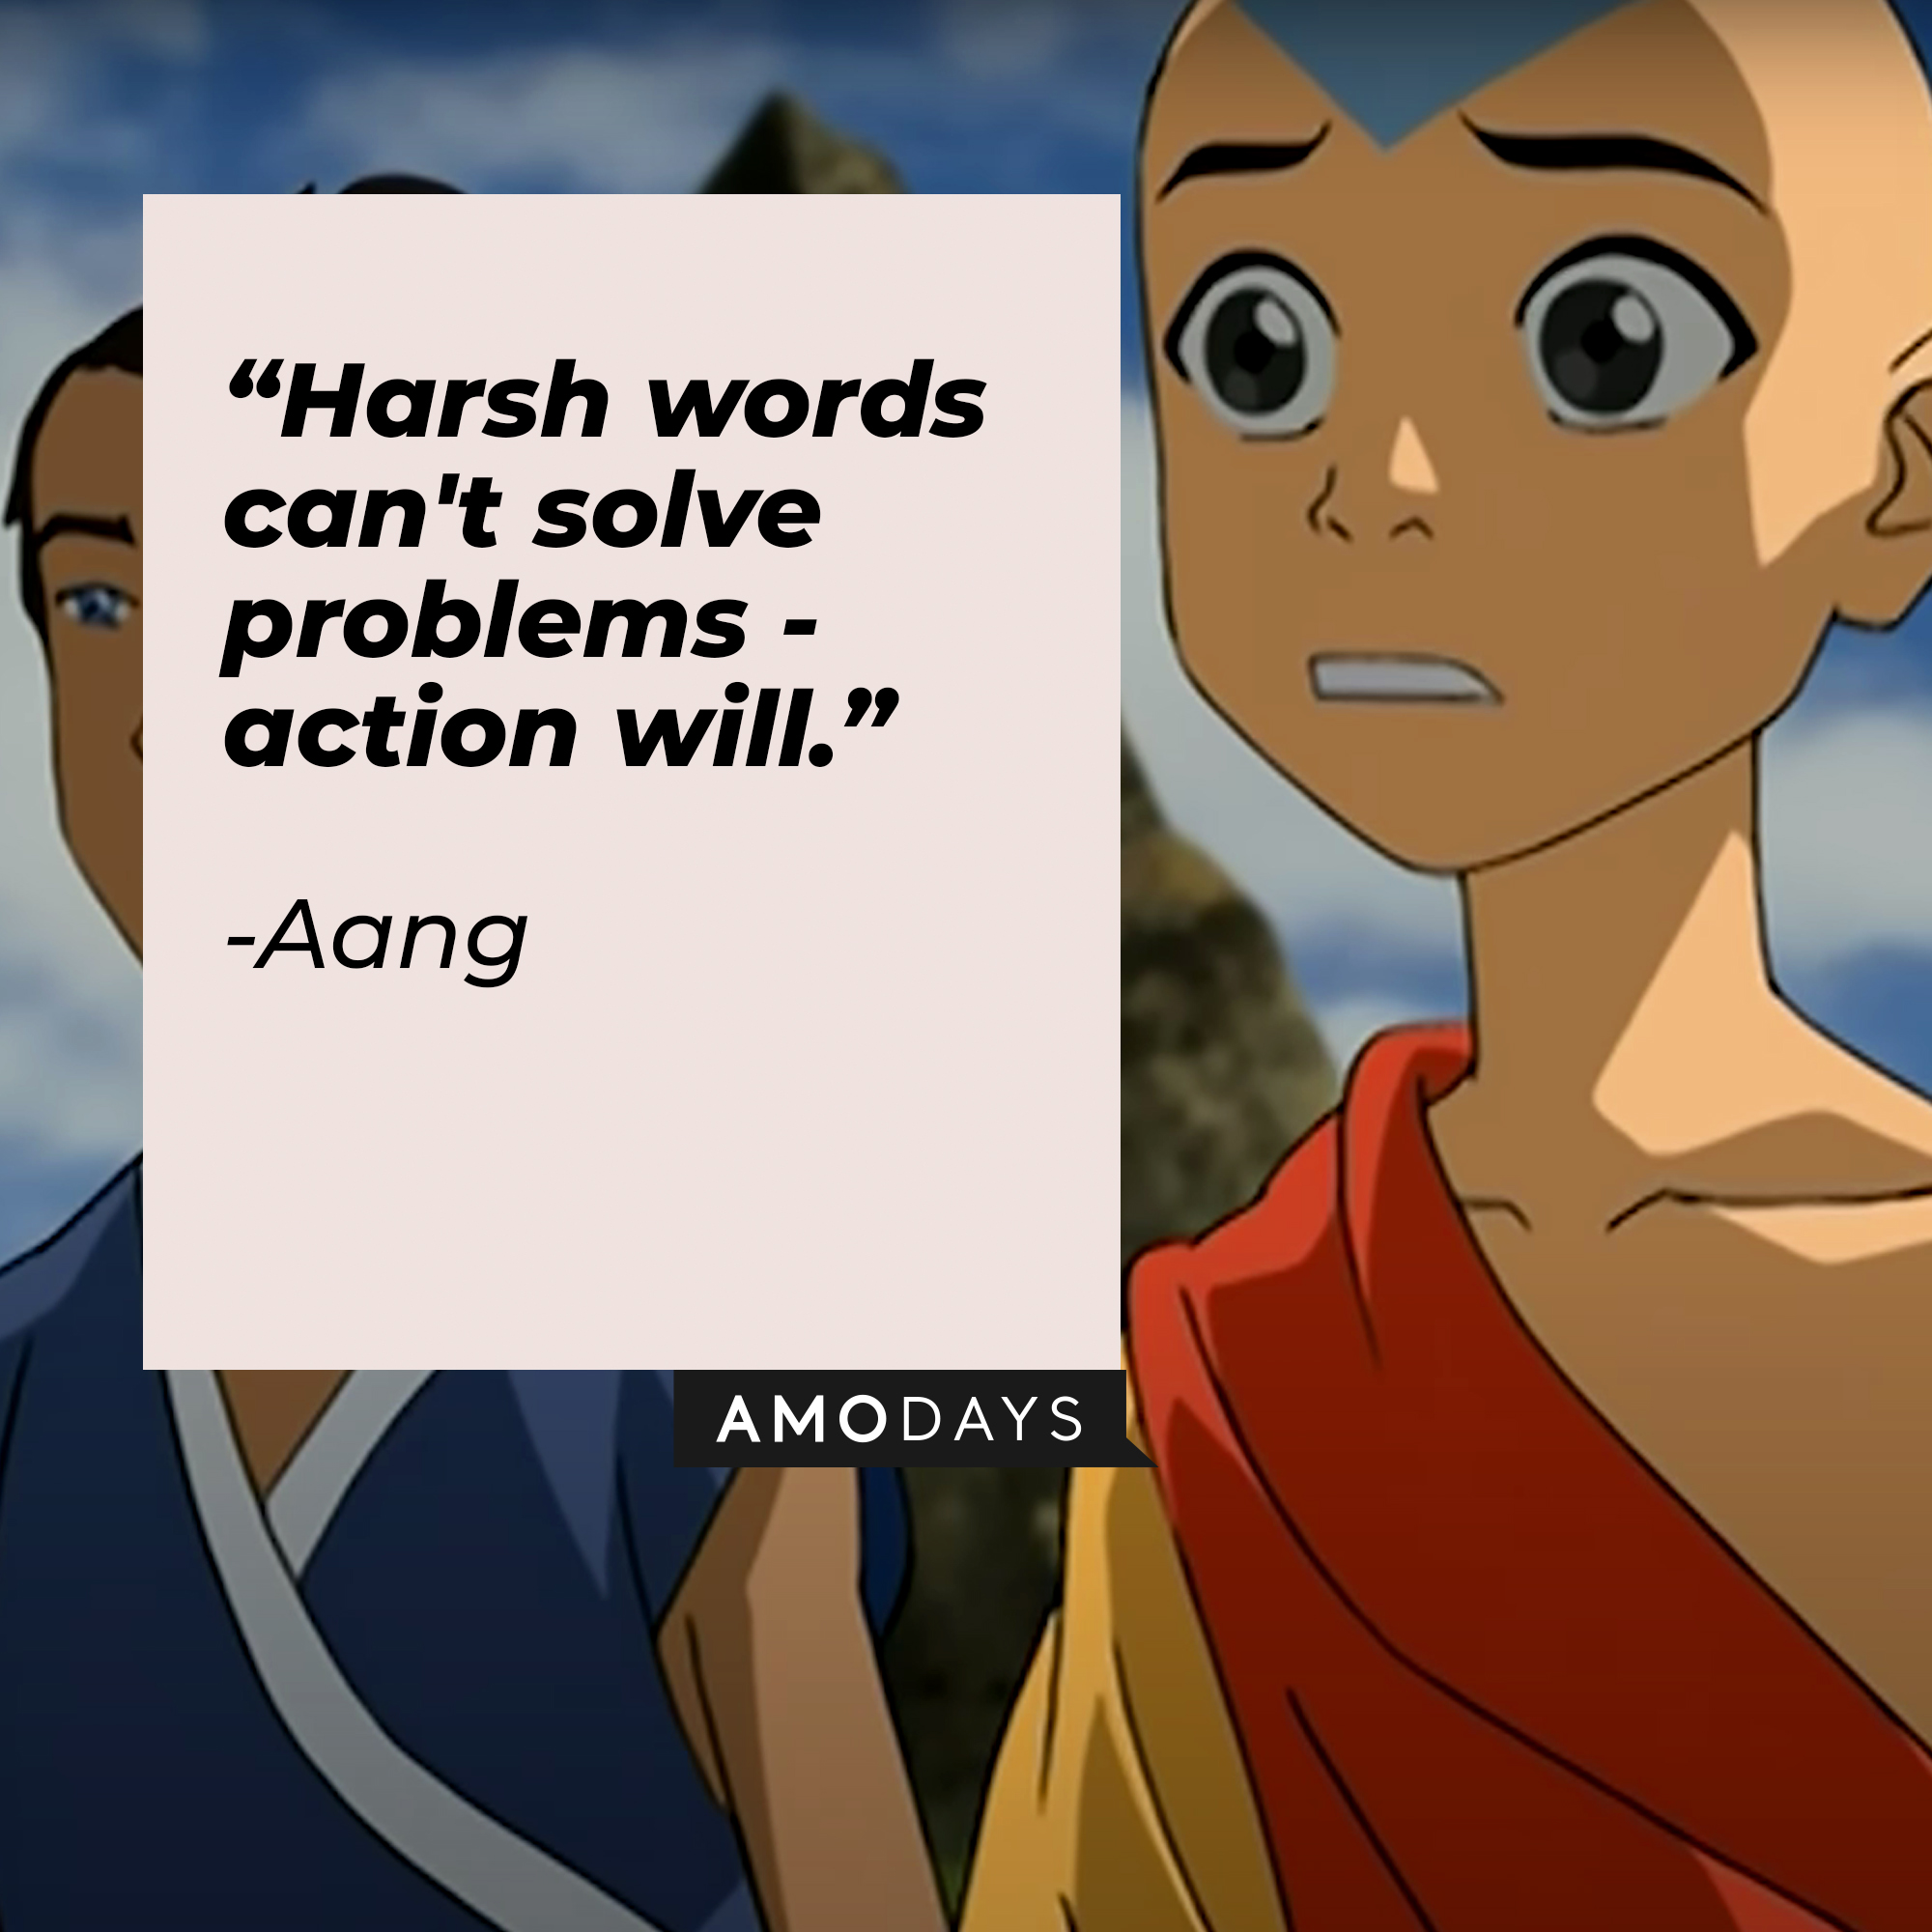 Aang’s quote: “Harsh words can't solve problems -- action will.” | Source: Youtube.com/TeamAvatar